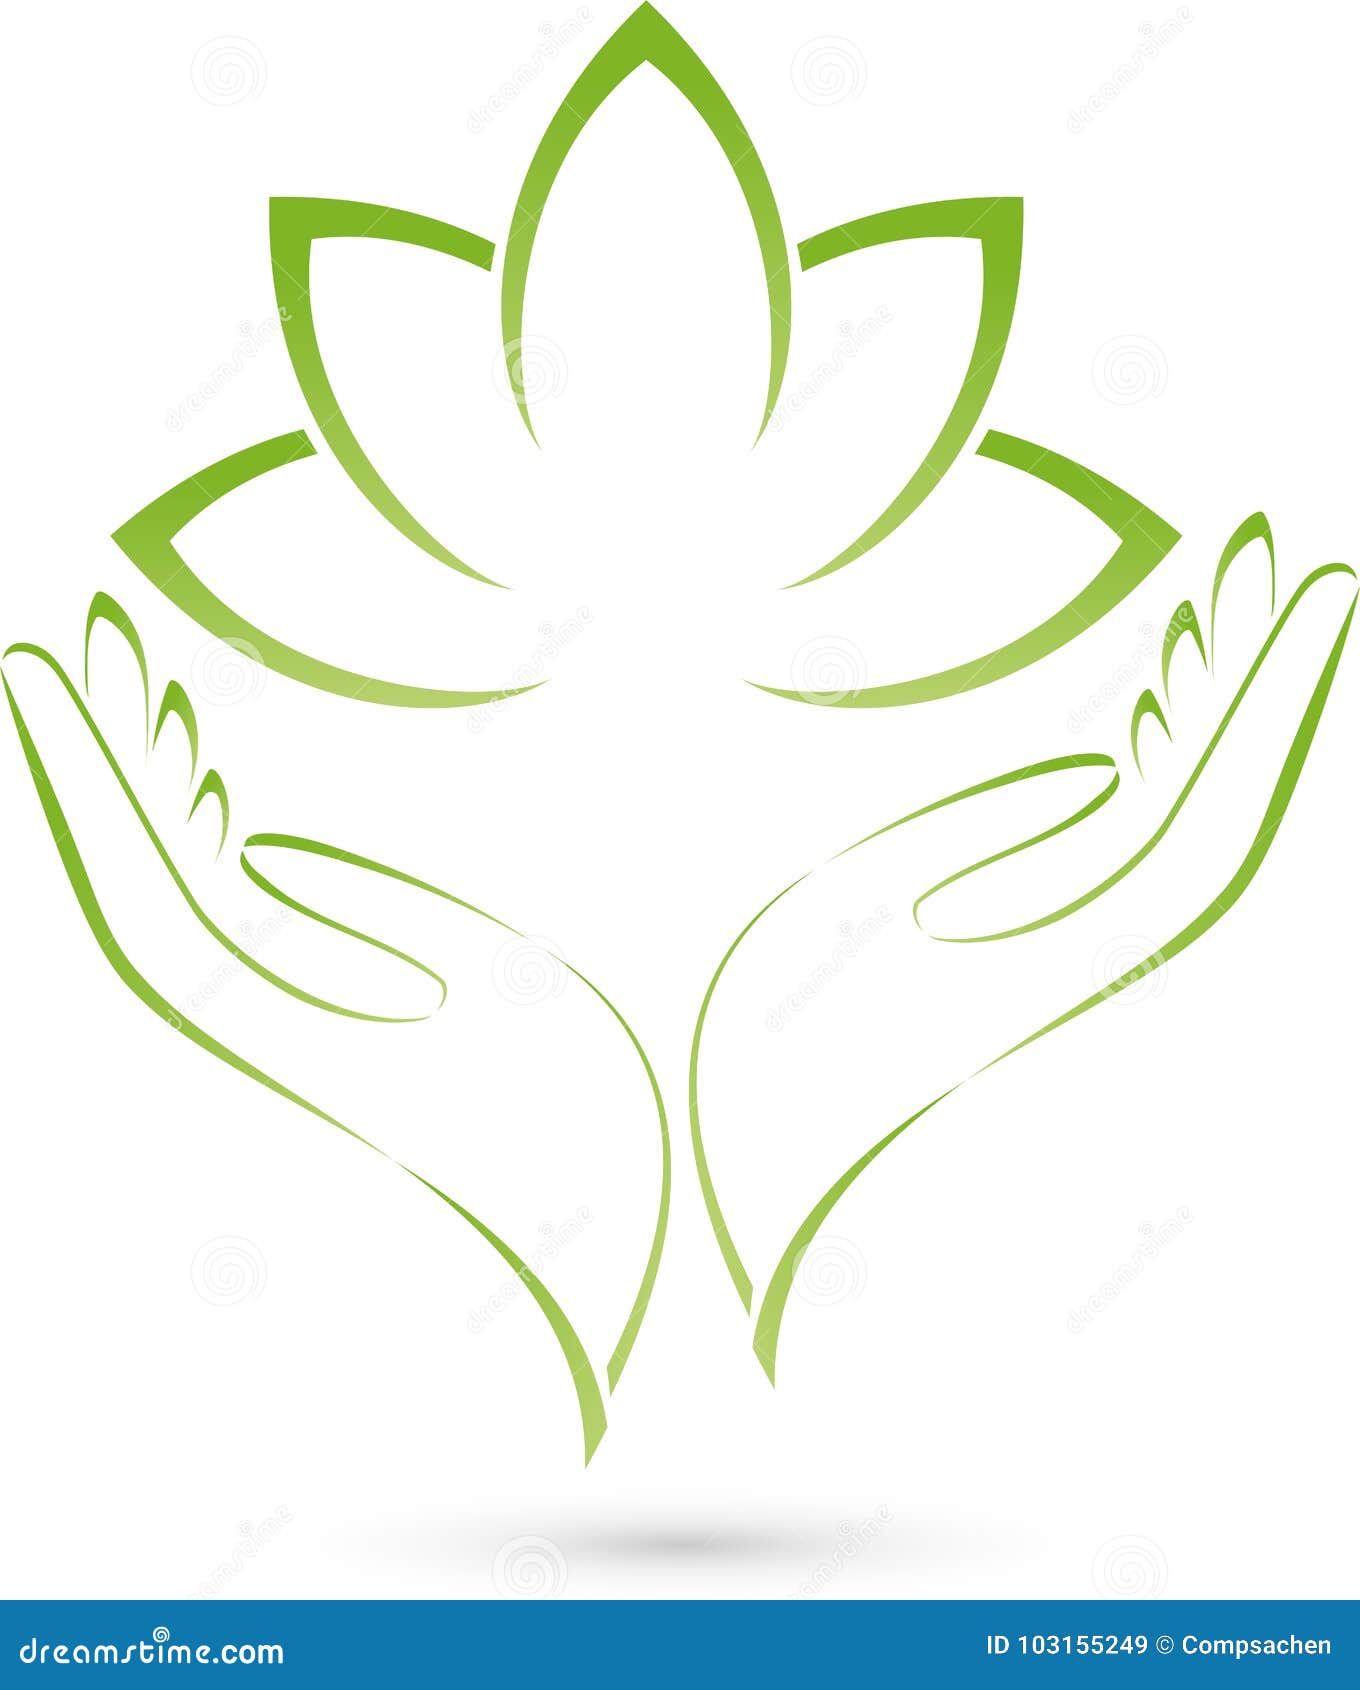 two hands and leaves, massage and wellness logo